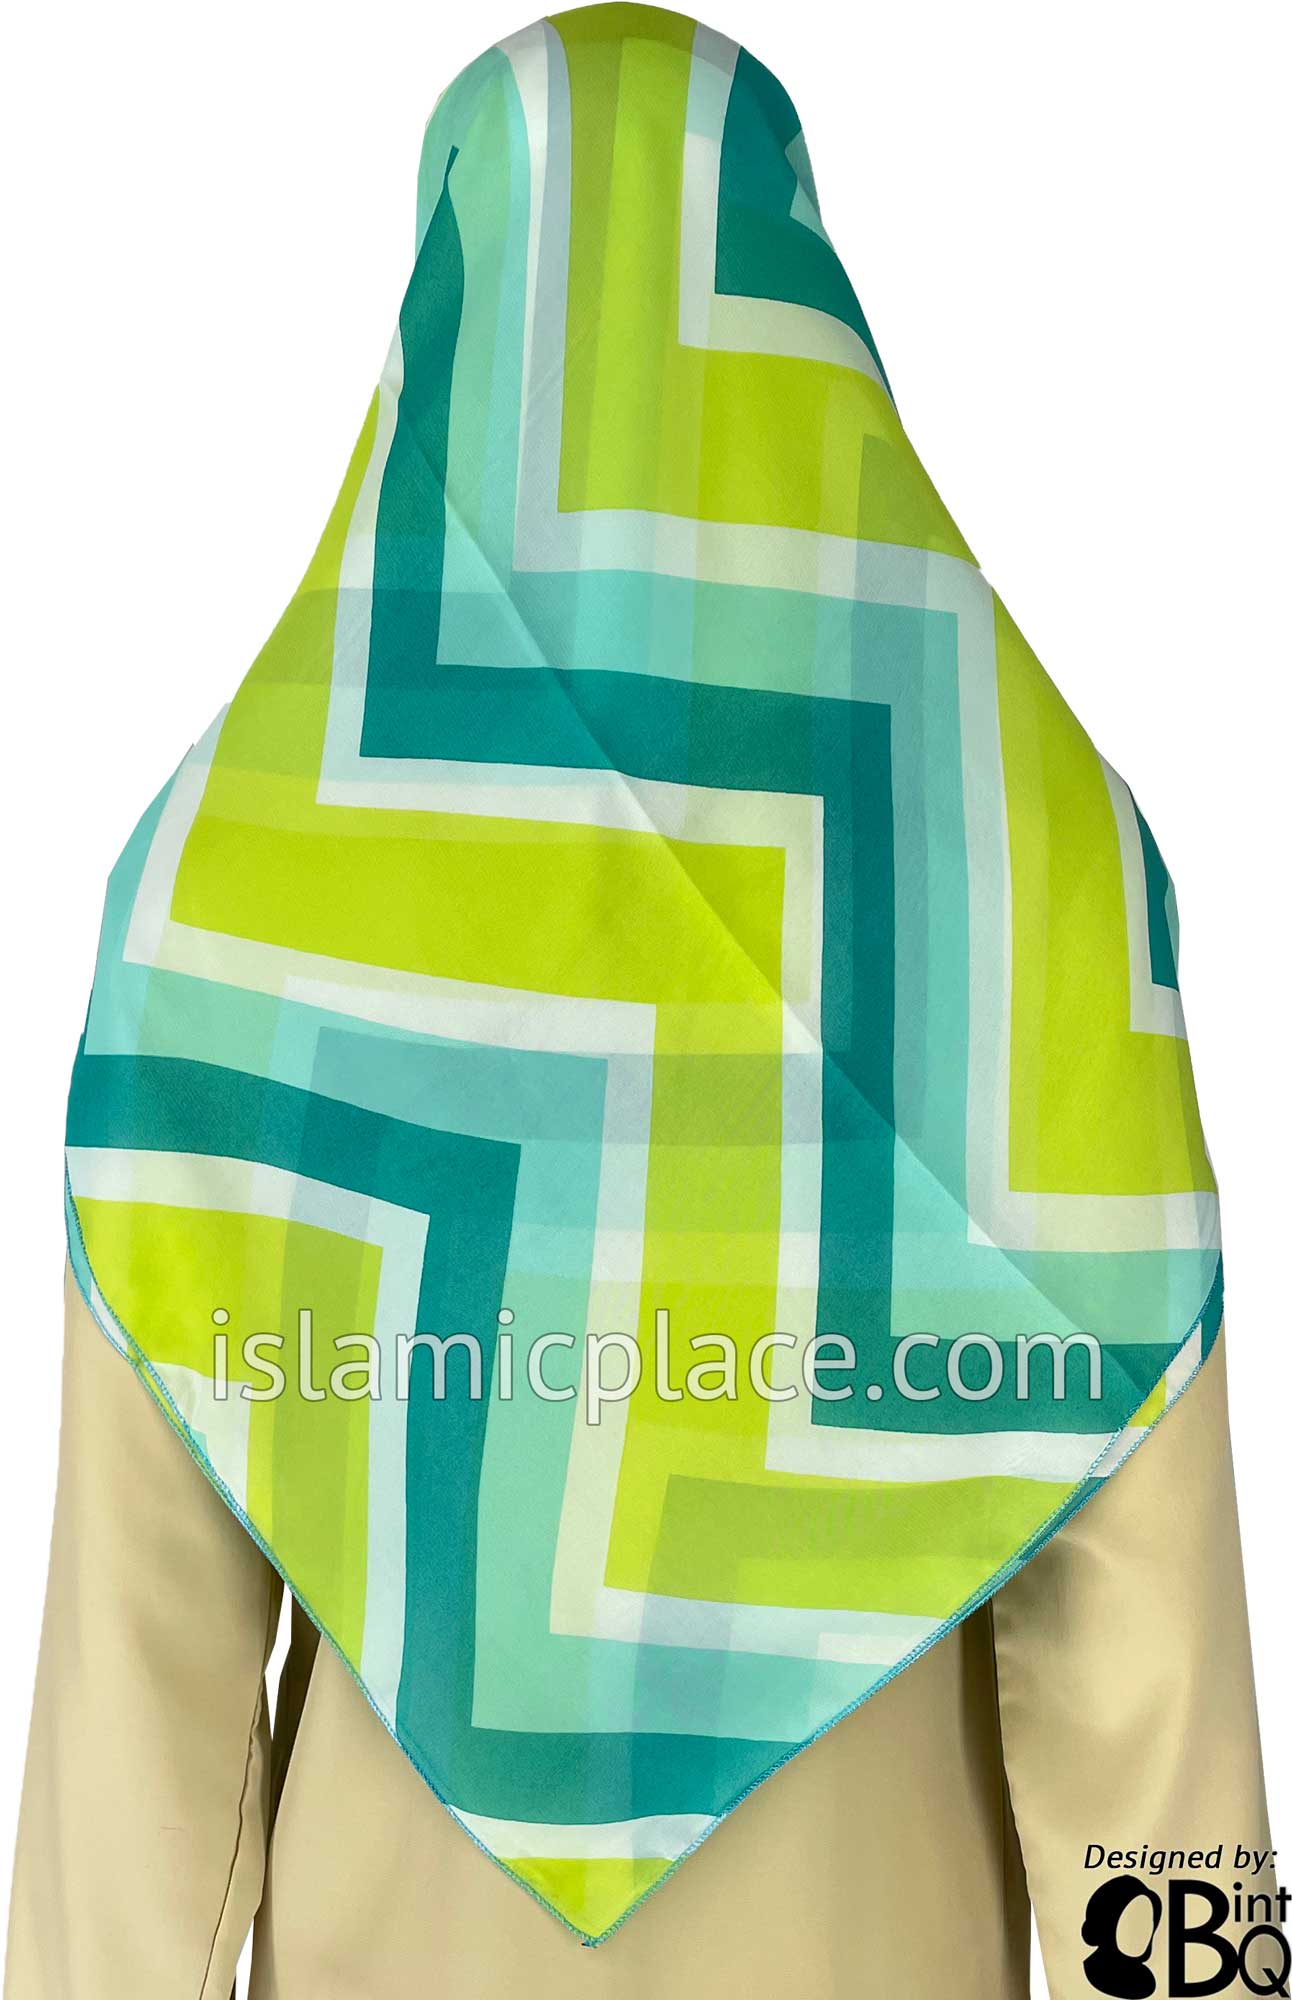 Lime Green, White, Turquoise and Teal zig zag pattern - 45" Square Printed Khimar